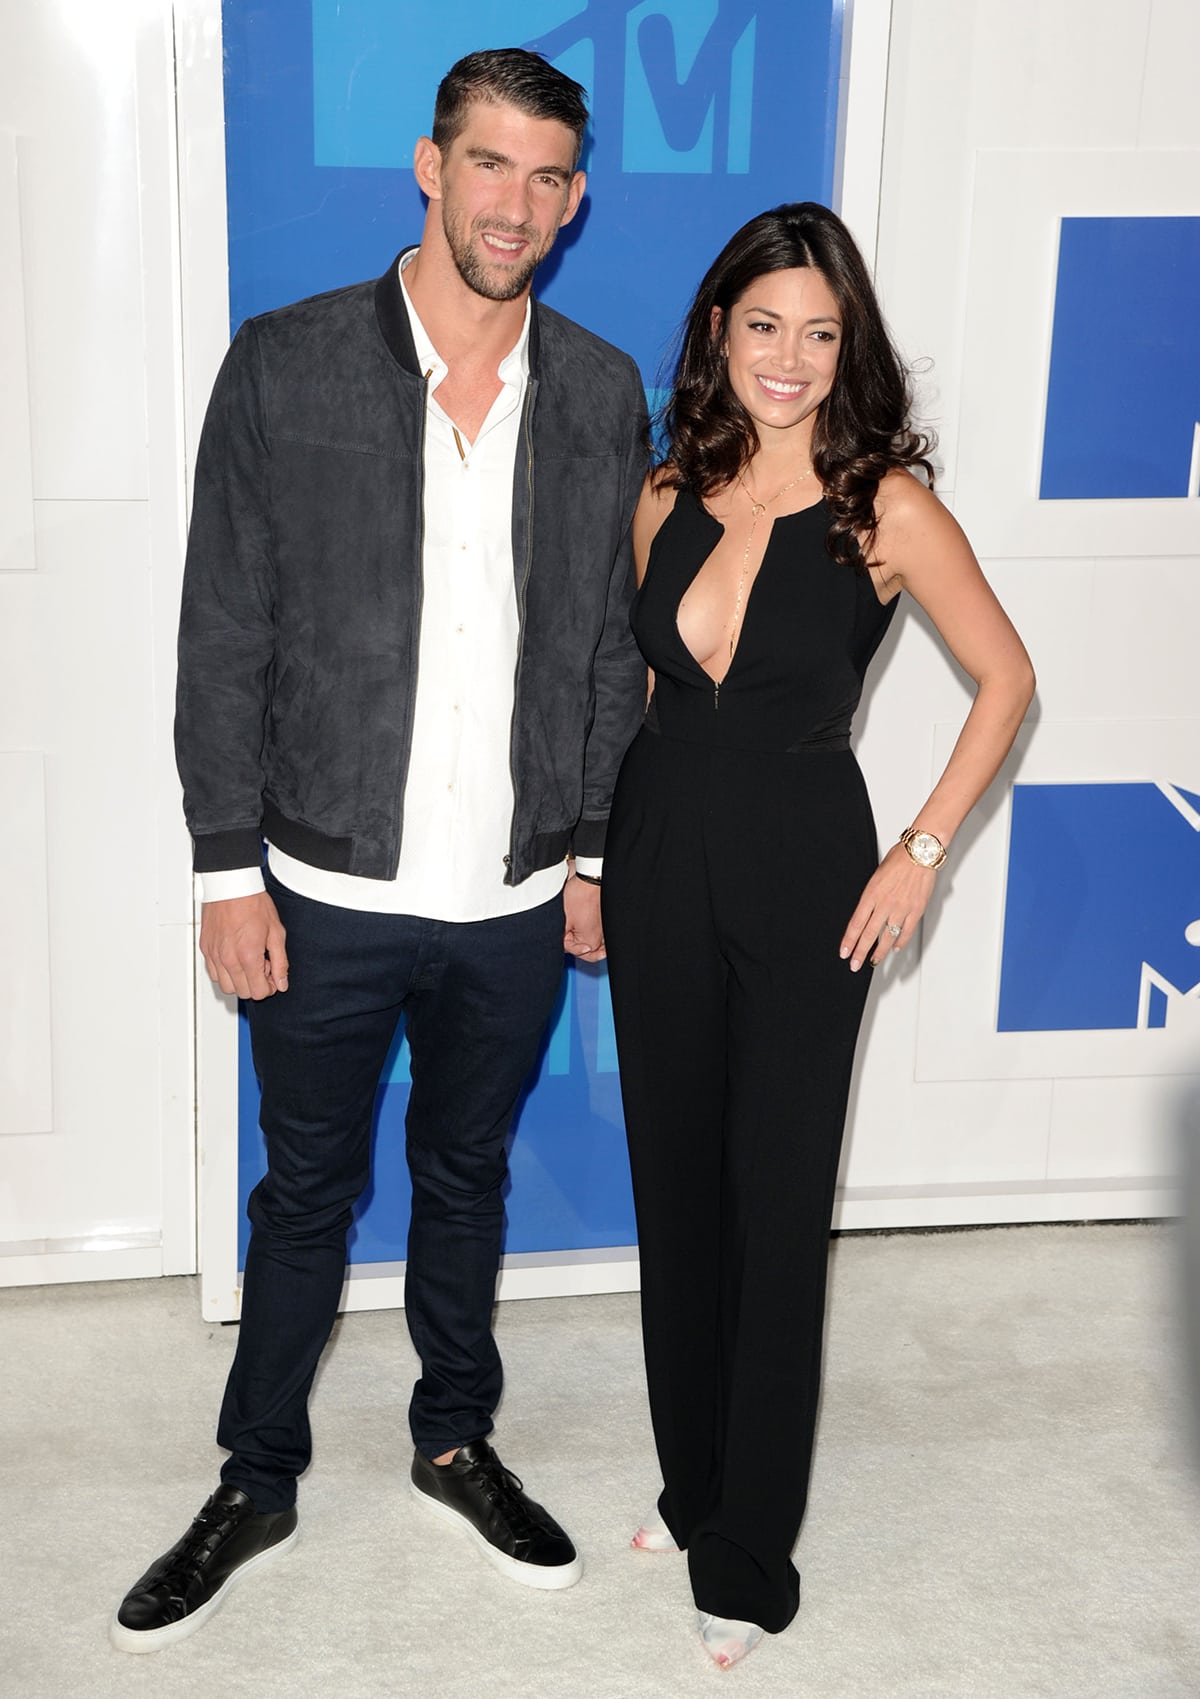 Michael Phelps and Nicole Johnson, pictured at the 2016 MTV Video Music Awards, reconciled years later and got engaged in February 2015